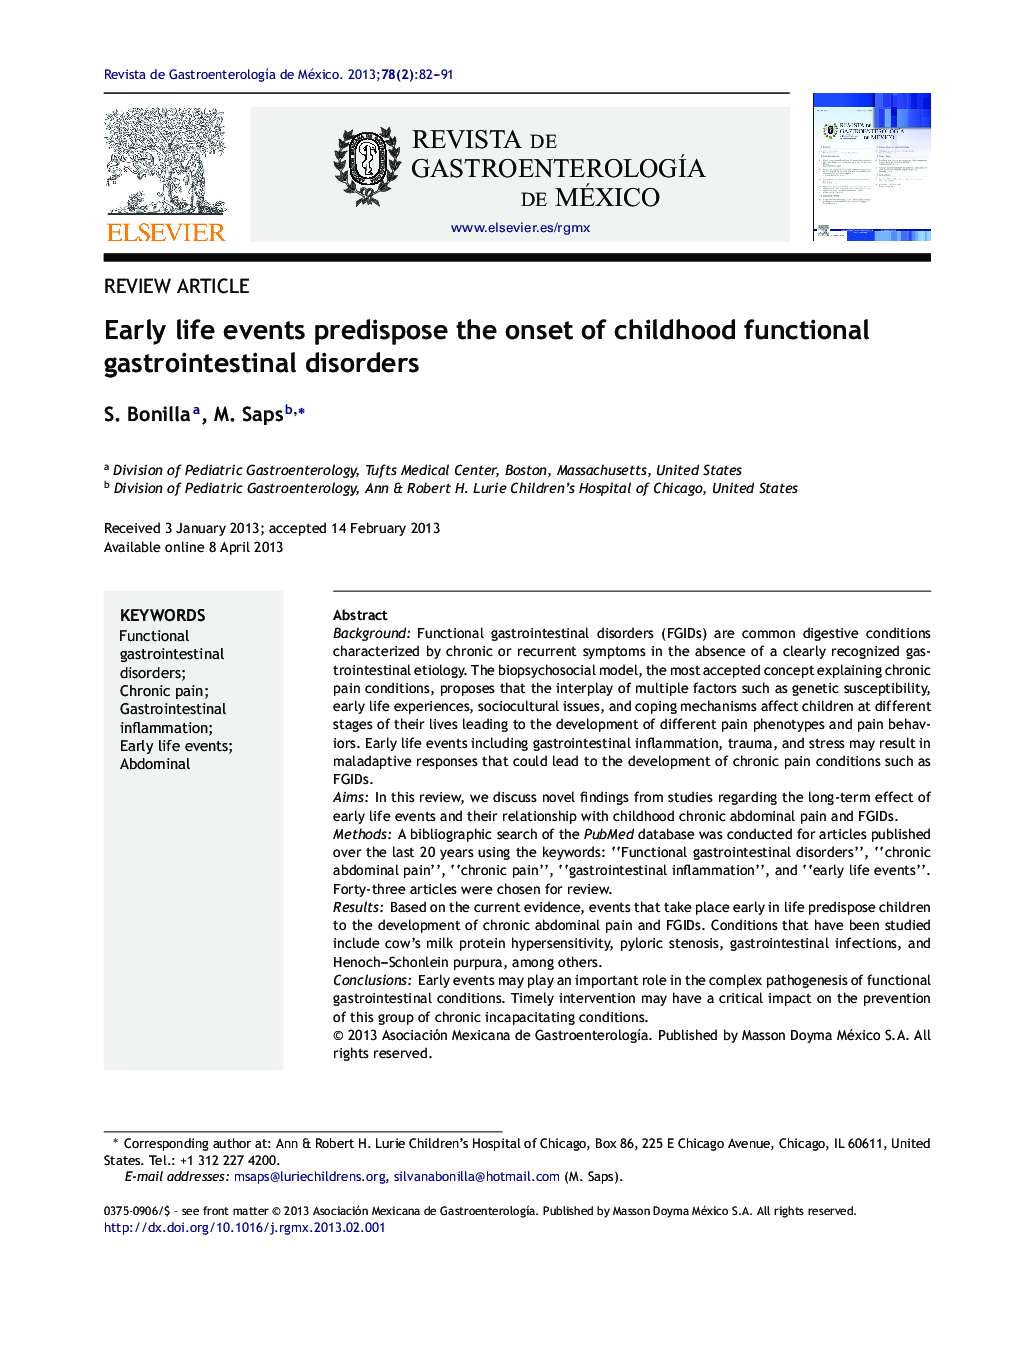 Early life events predispose the onset of childhood functional gastrointestinal disorders